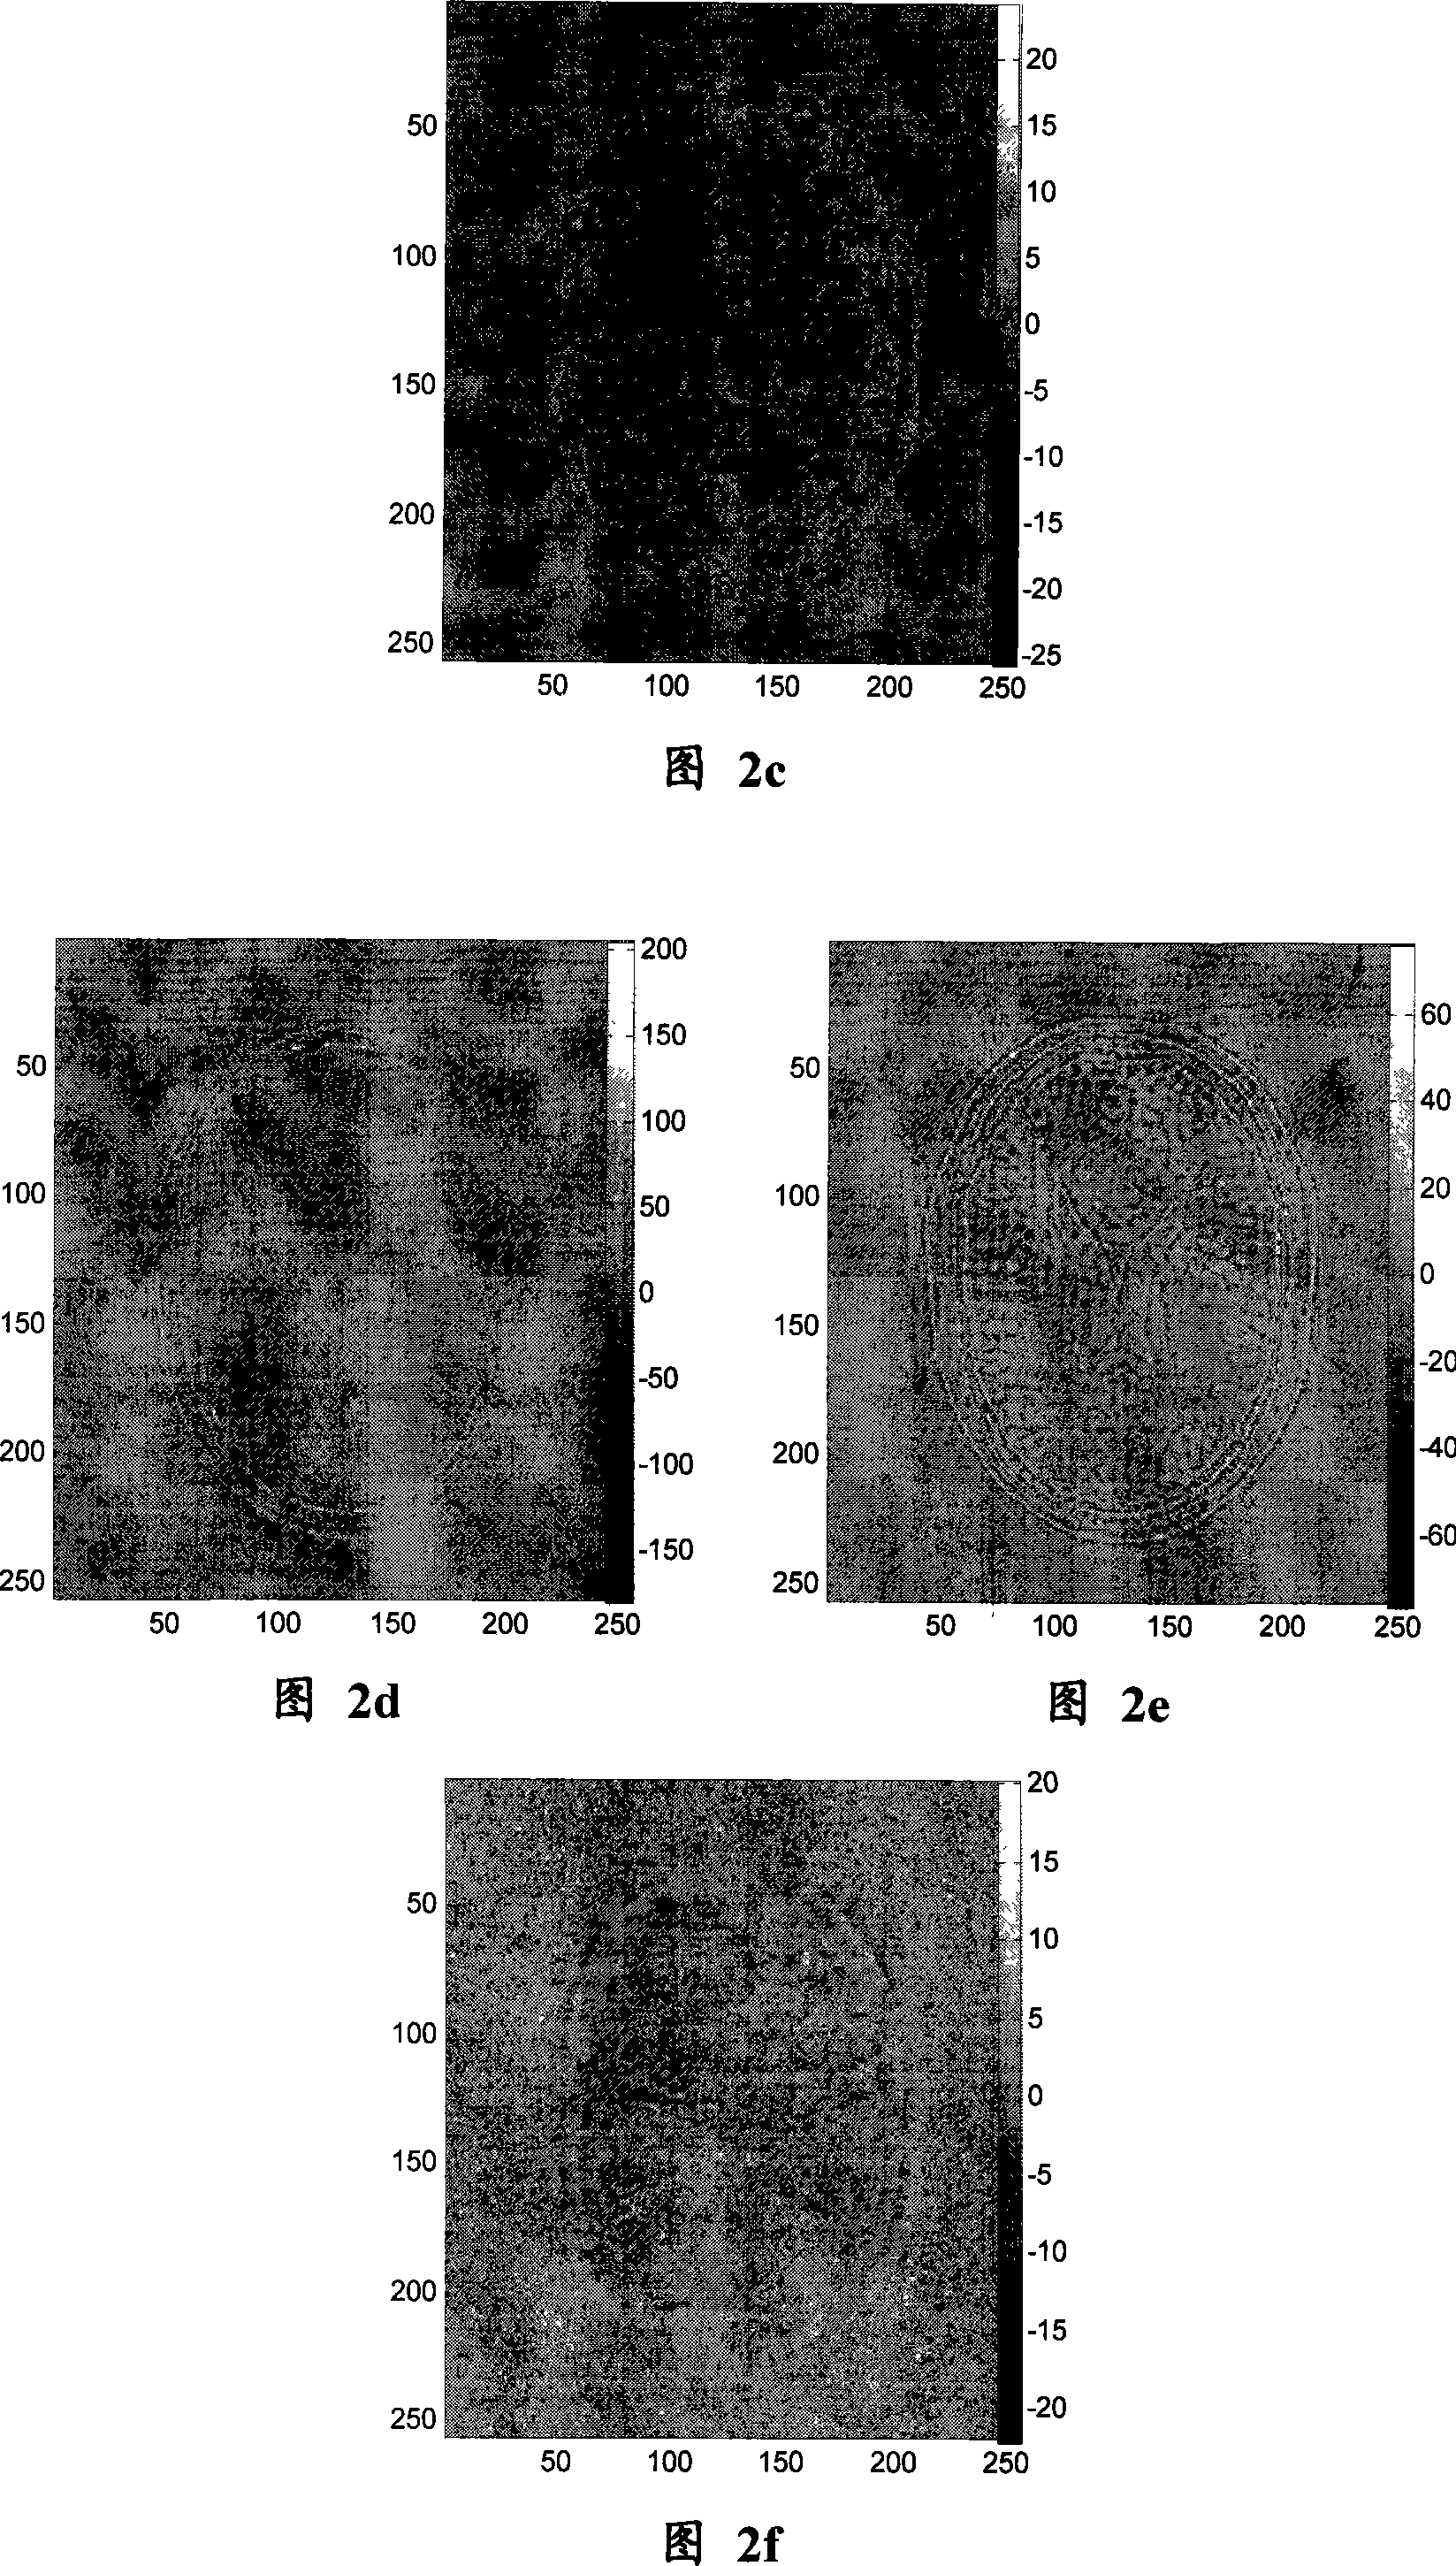 Signal noise removing method based on reconstruction signal substituting frequency spectrum data